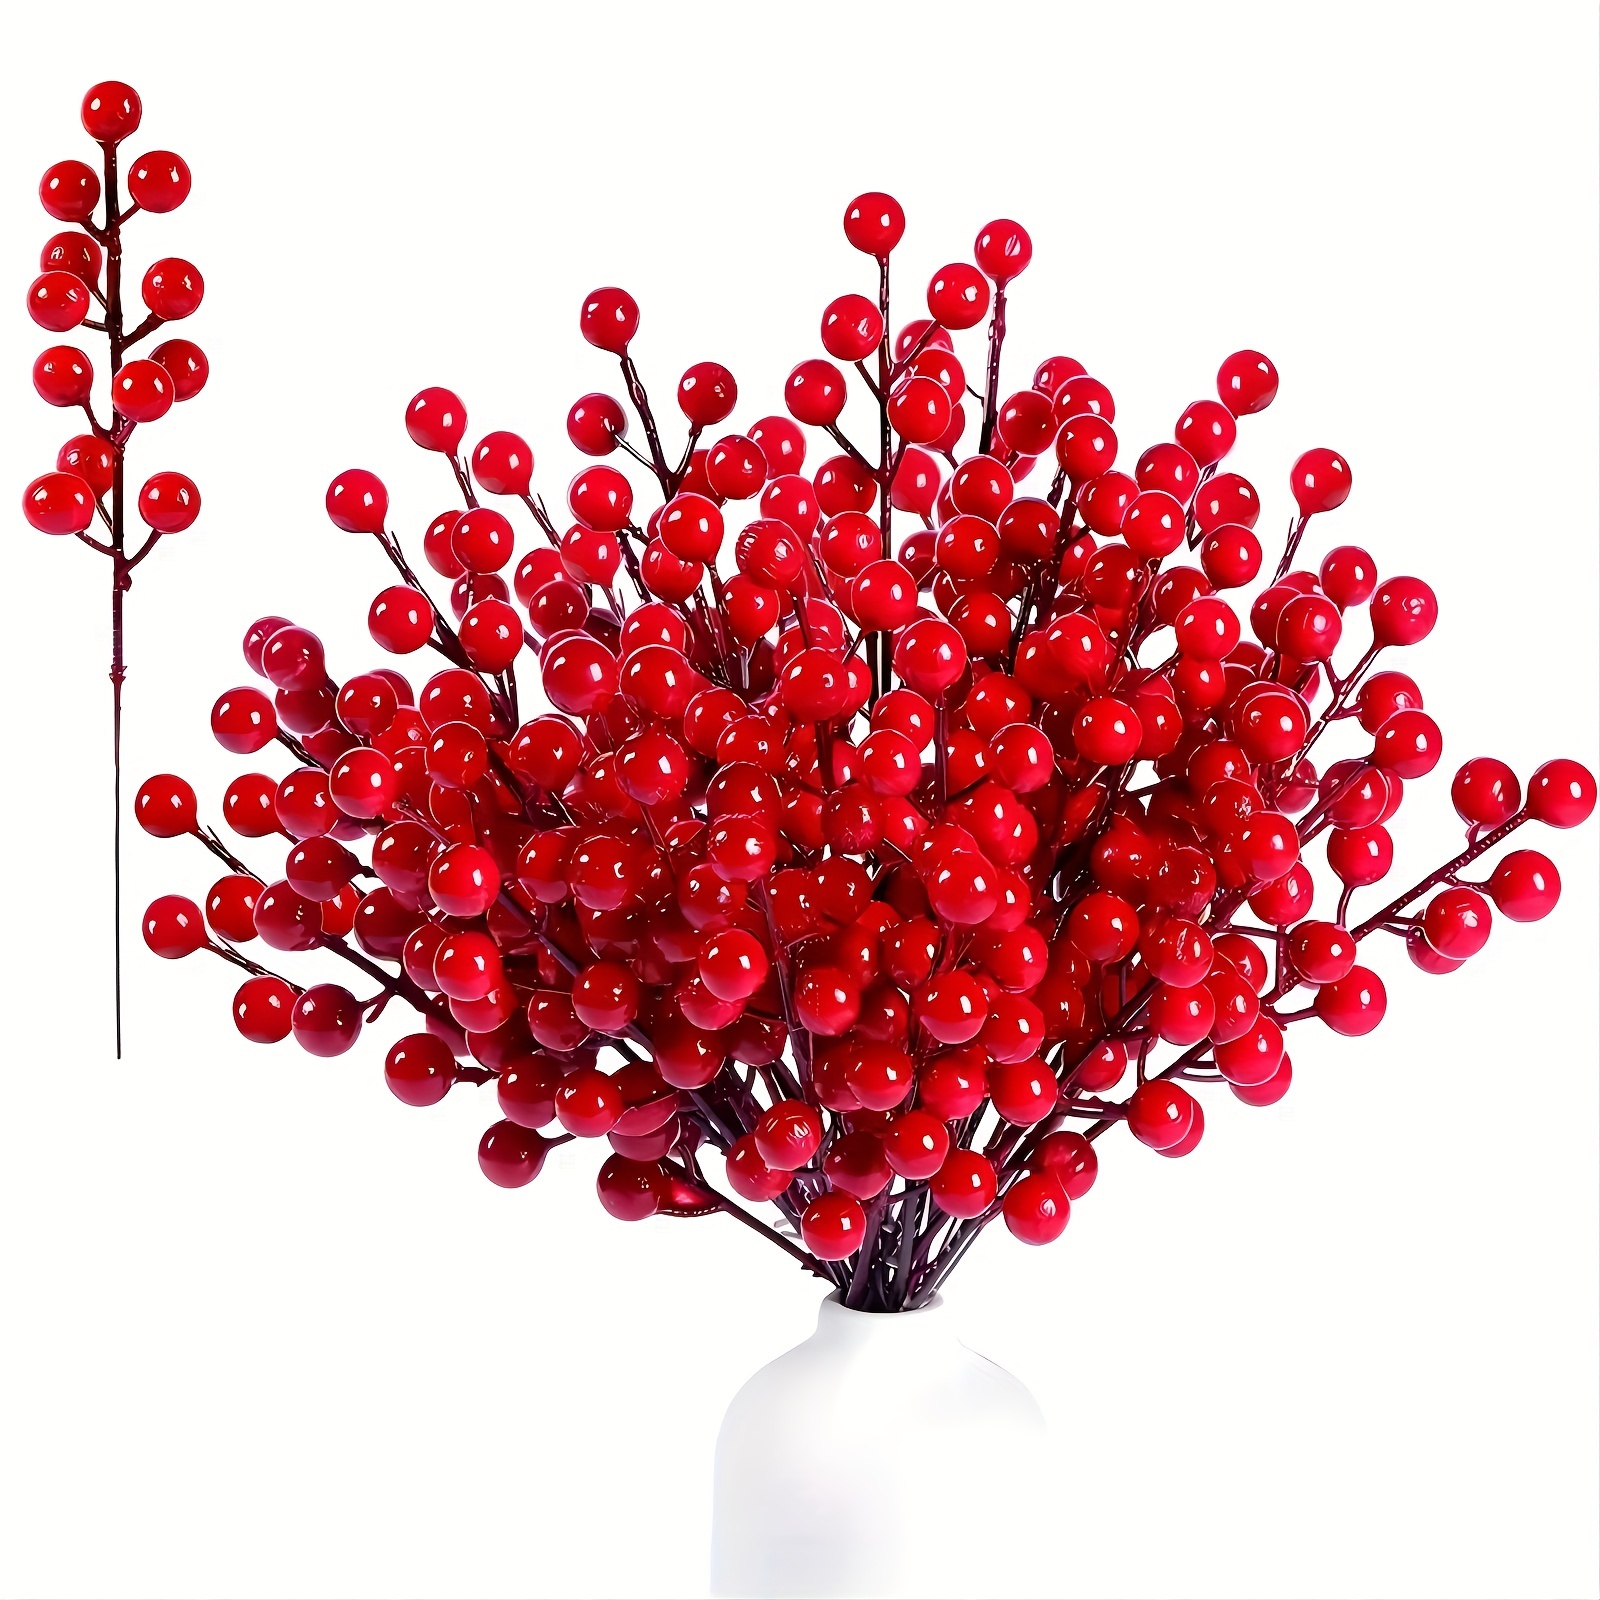 10pcs artificial berry stems picks Realistic Red Berries red berry picks  Faux